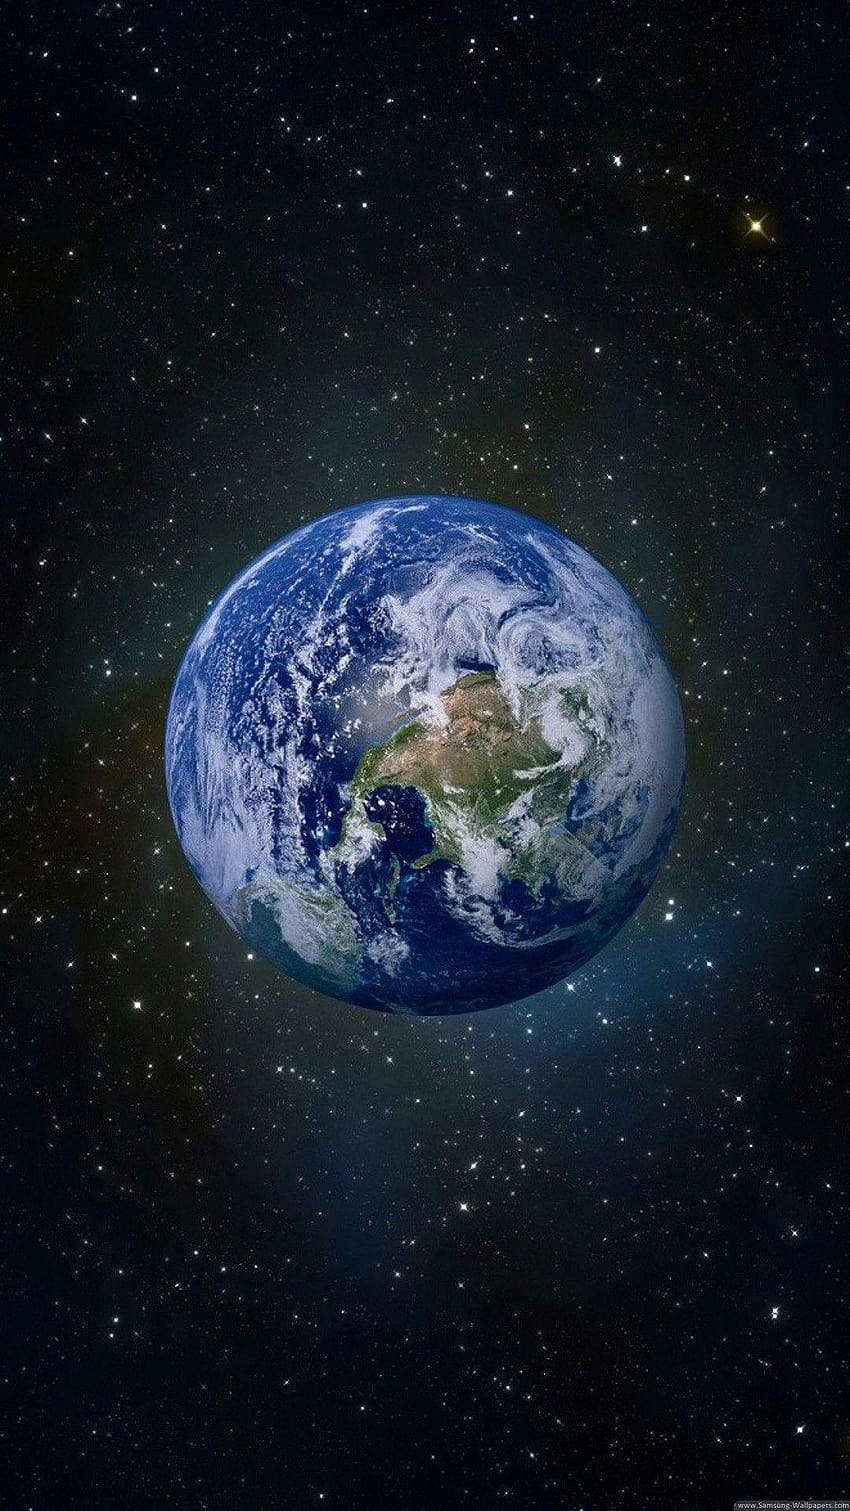 The earth is shown in space with stars and galaxies - Earth